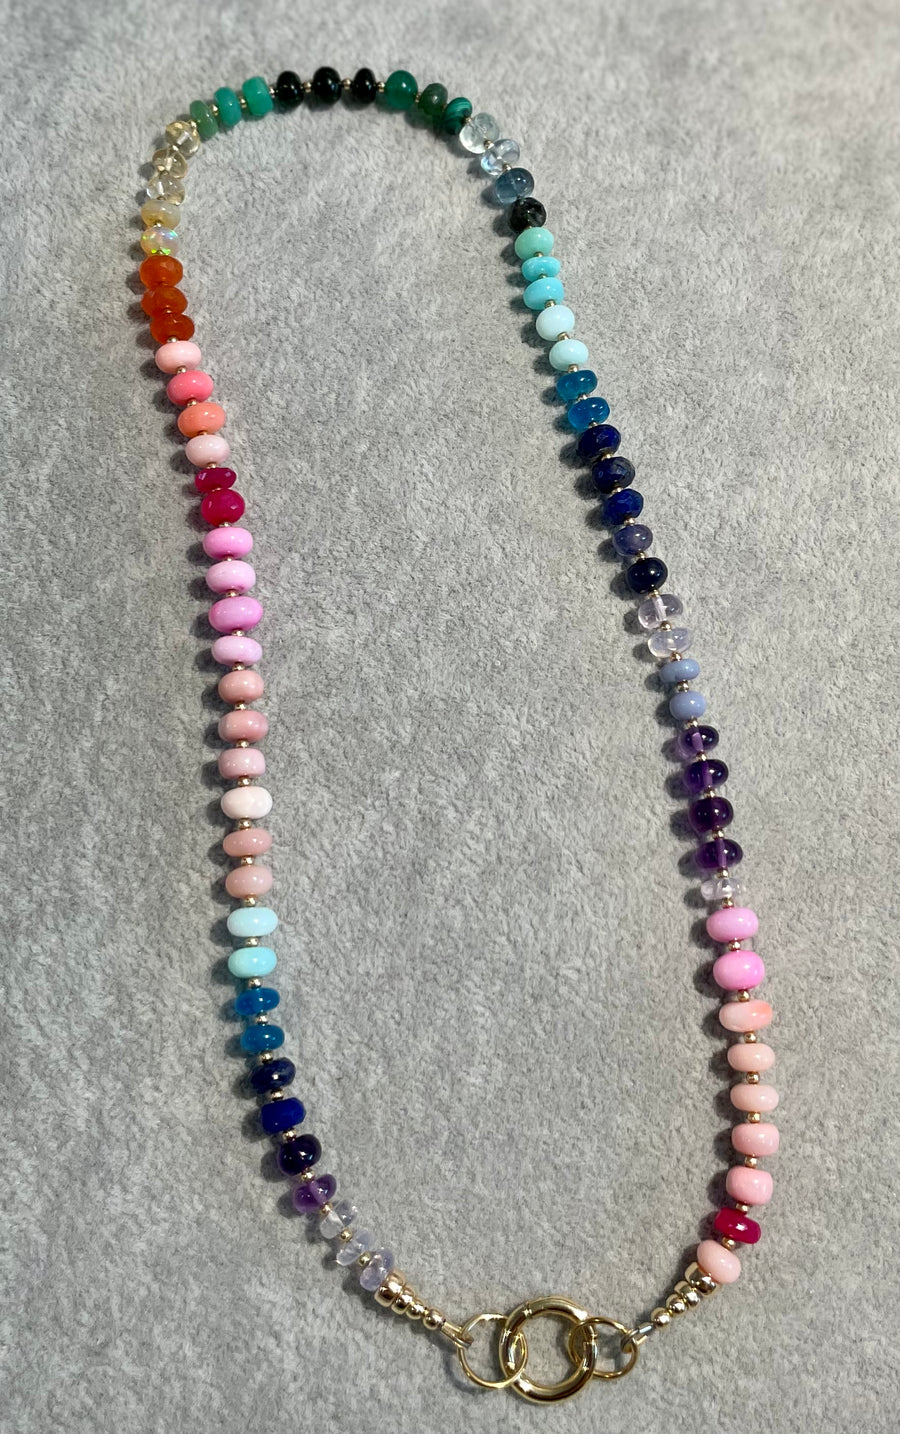 All Stone Smooth necklaces